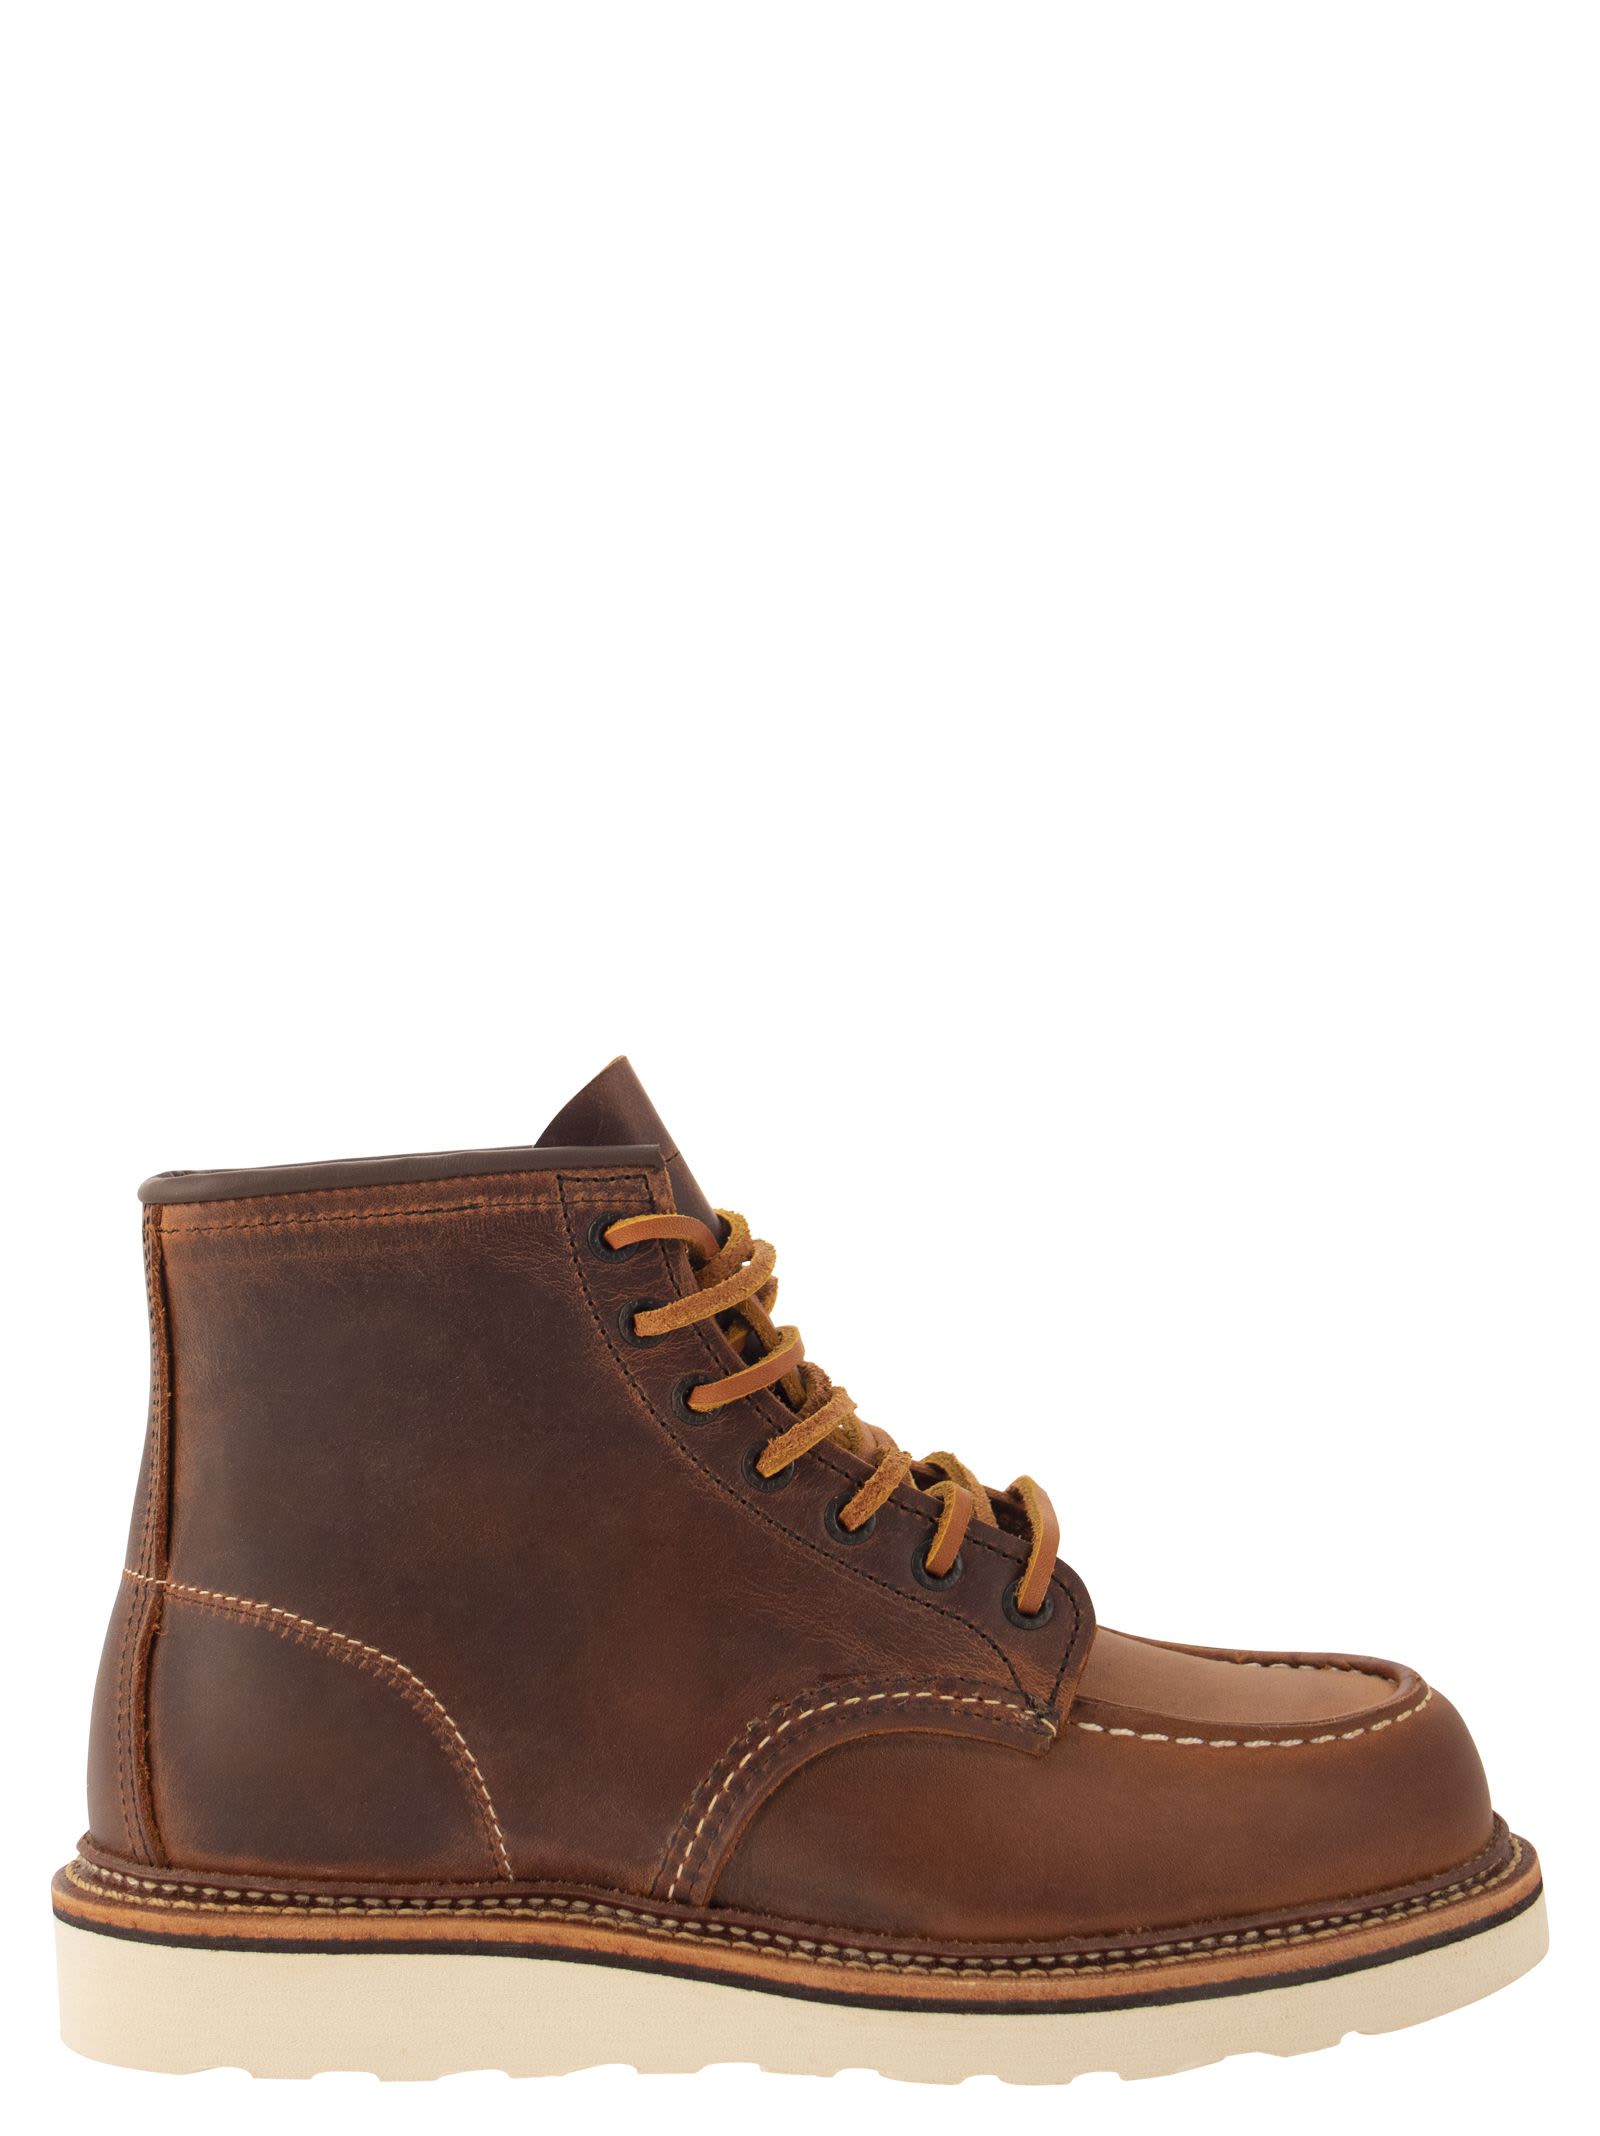 Red Wing Classic Moc - Rough And Tough Leather Boot